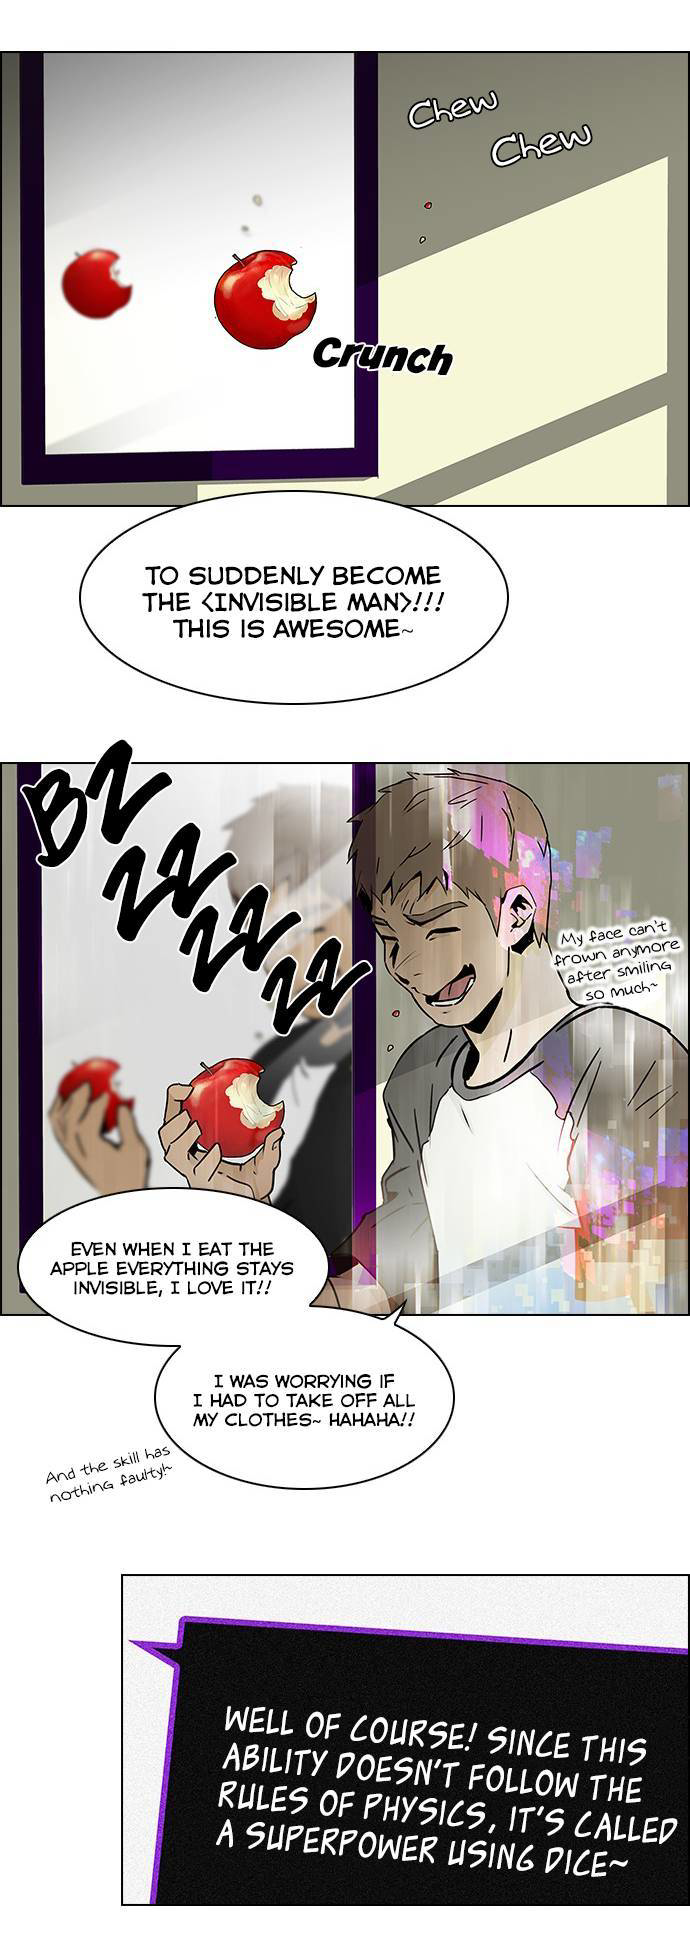 DICE: The Cube That Changes Everything Chapter 47 page 16